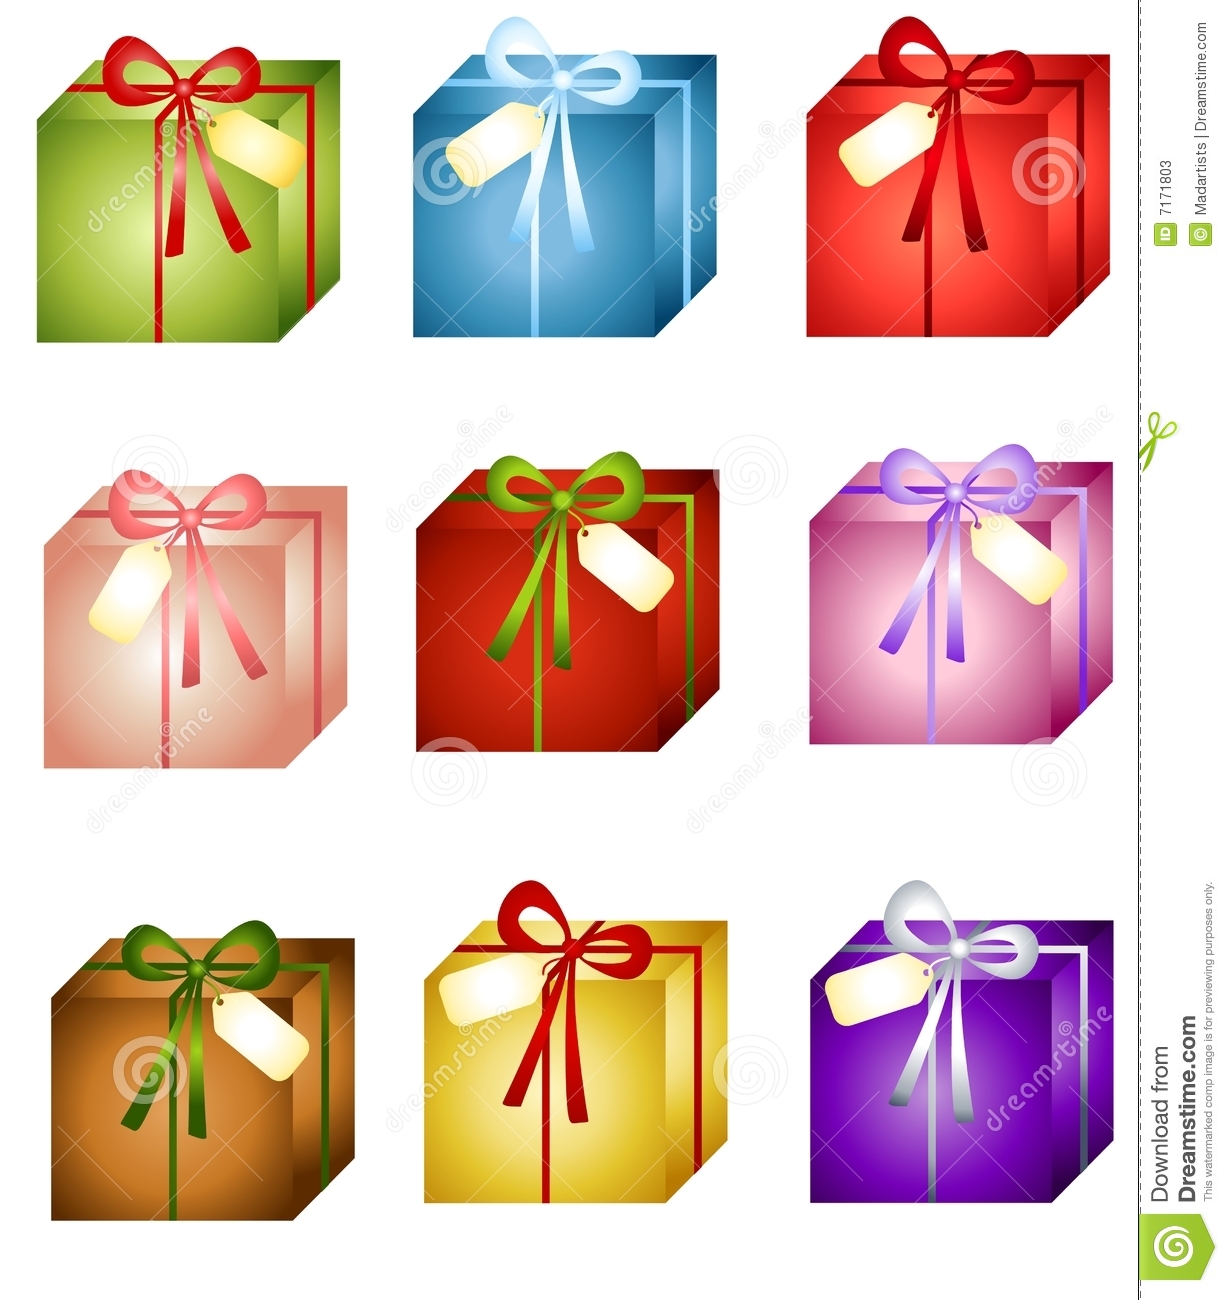 603 Christmas Presents free clipart.